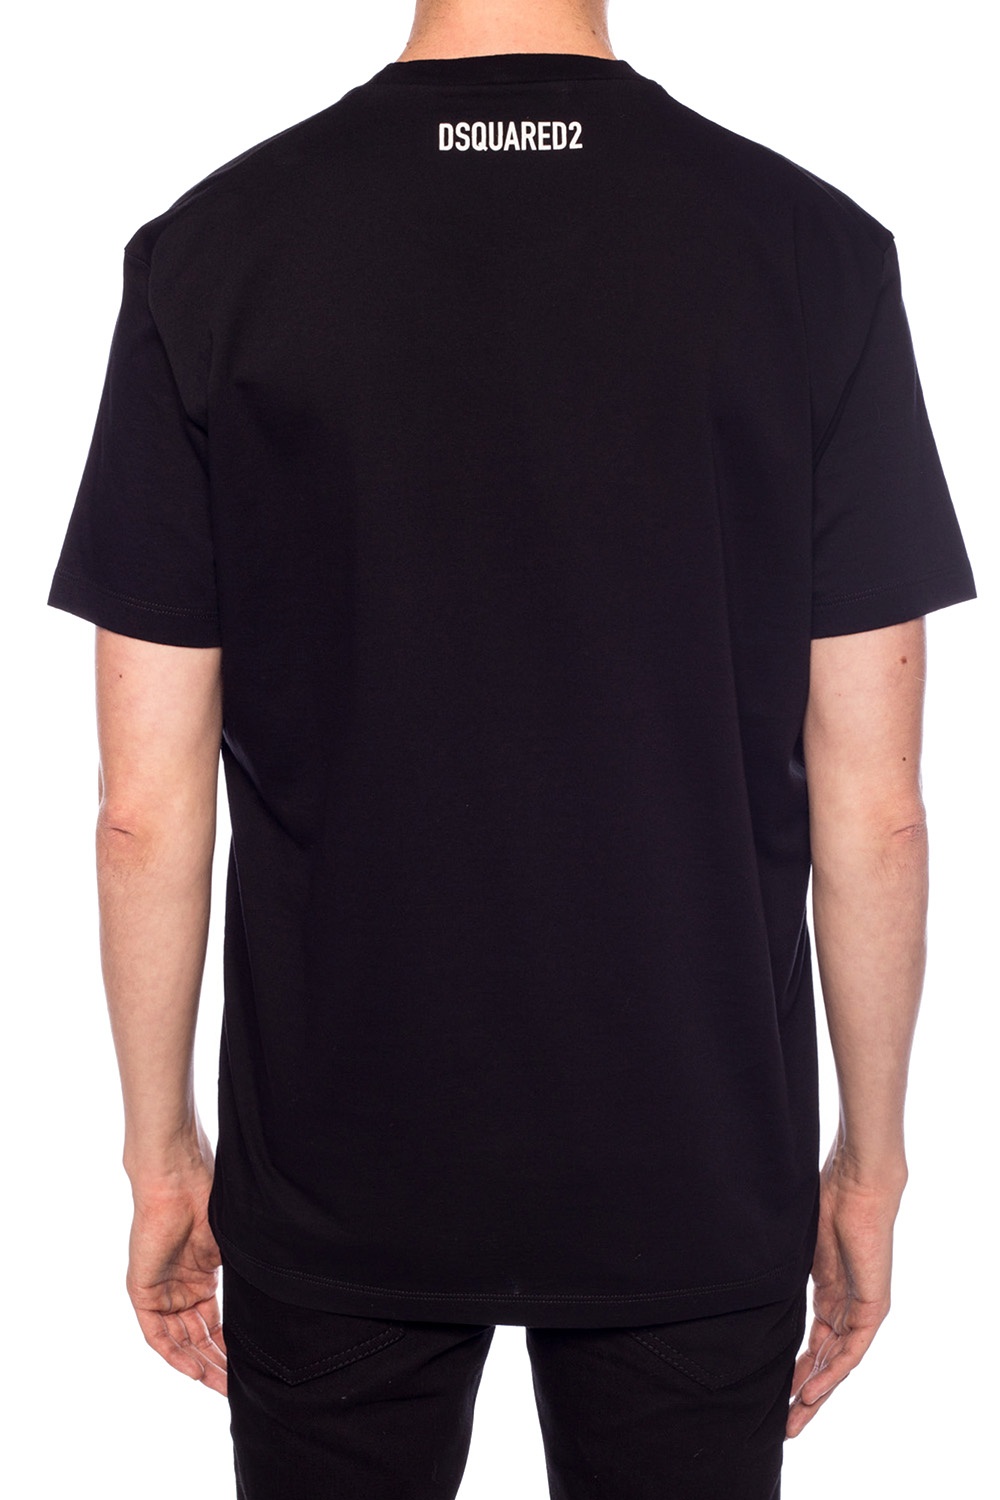 Black 'Exclusive for Vitkac' limited collection t-shirt Dsquared2 - Vitkac  Italy